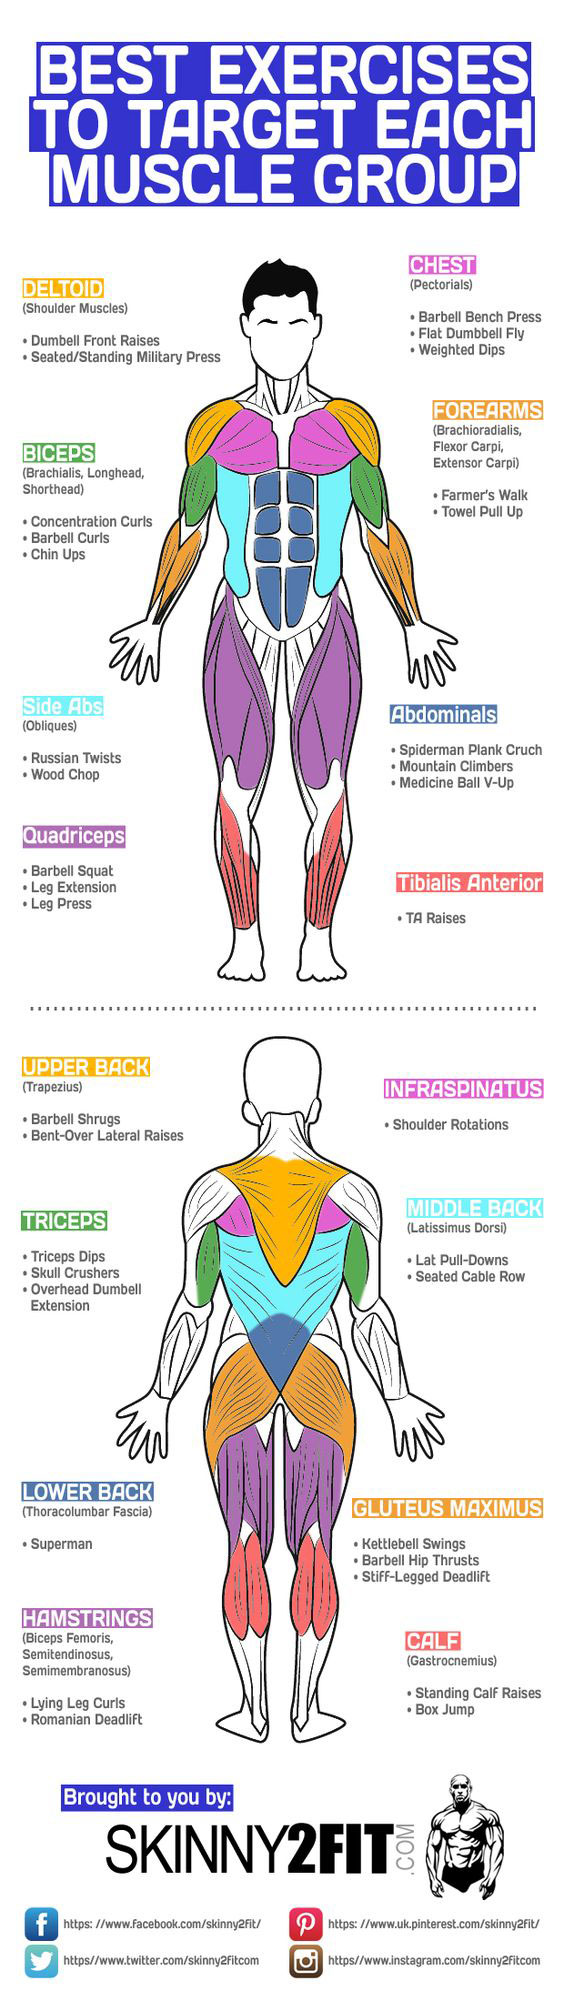 Best-Exercises-To-Target-Each-Muscle-Group